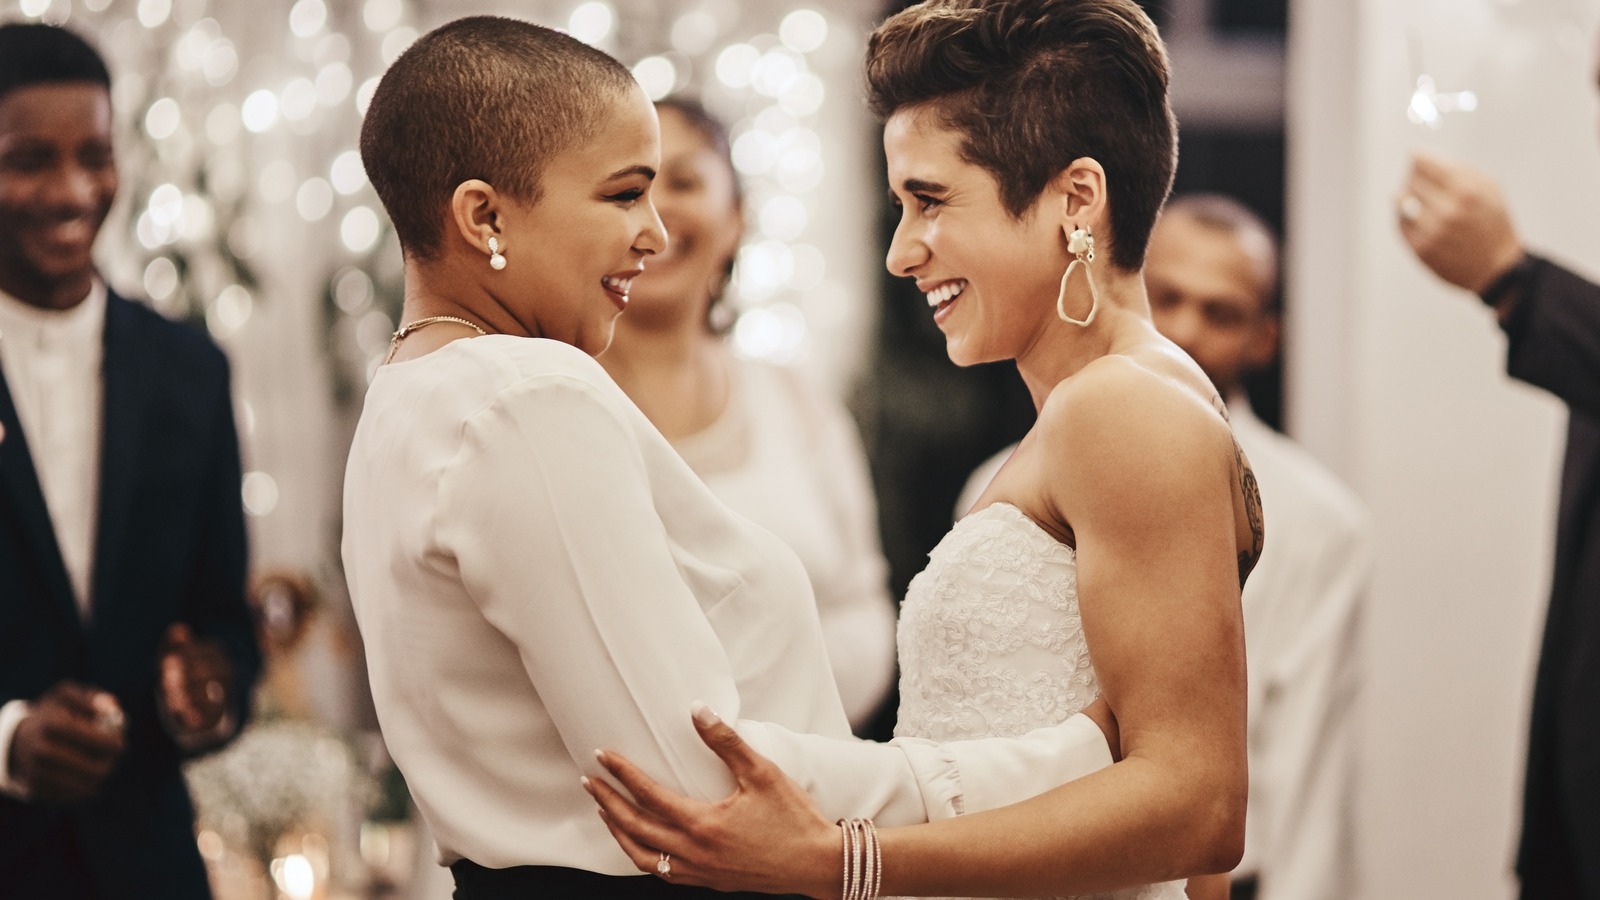 12 Tips For Finding The Best First Dance Song For Your Wedding Day